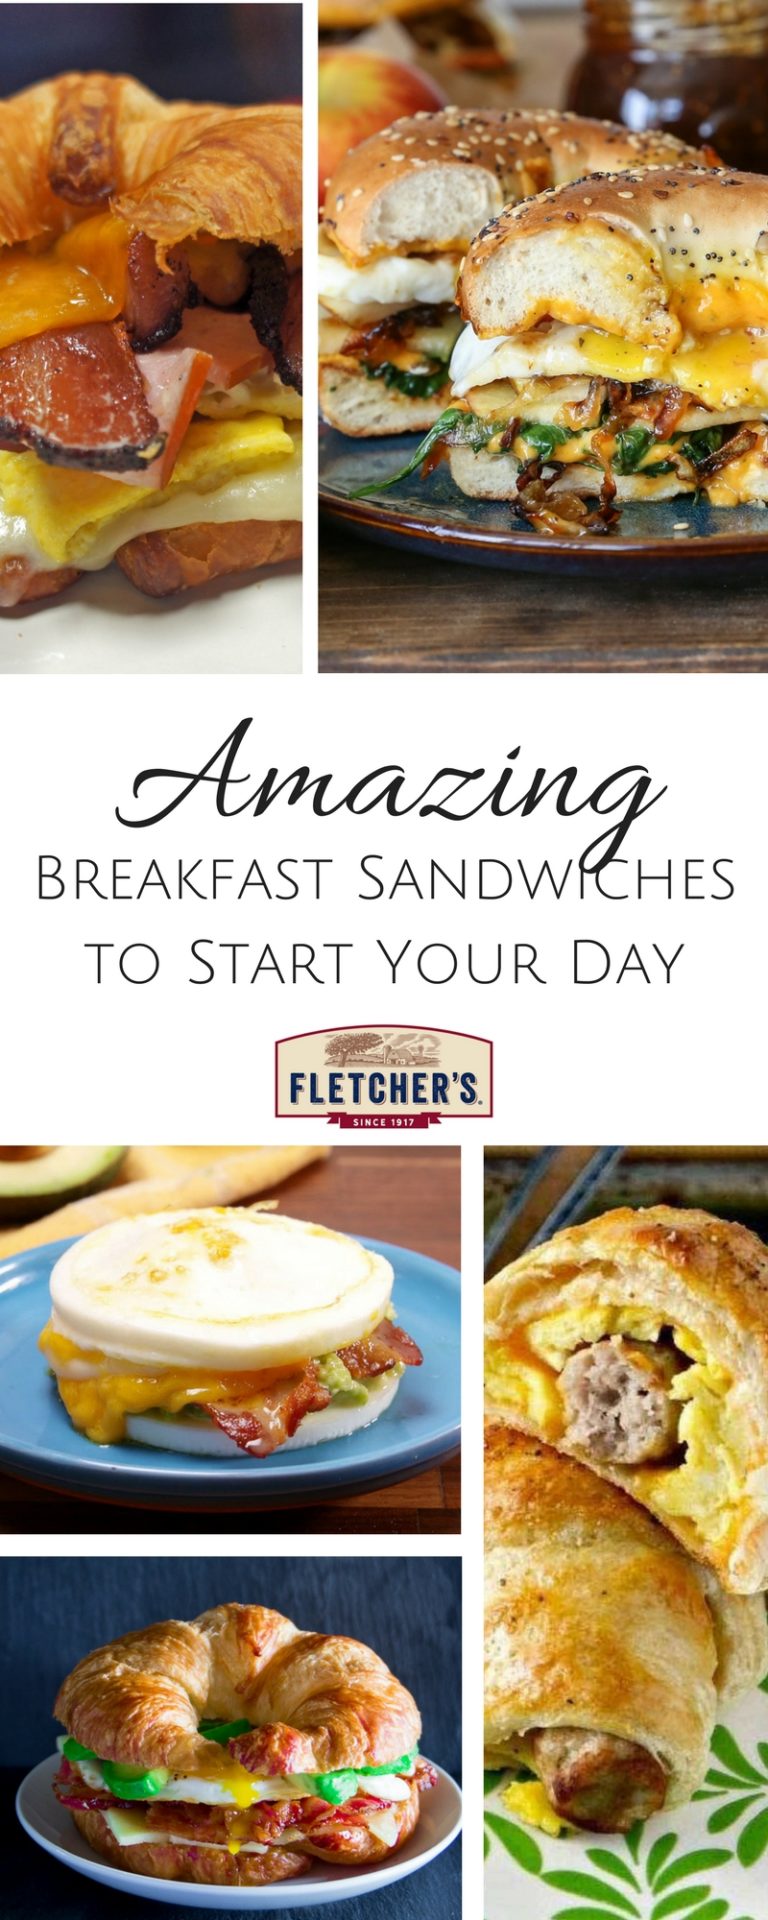 Six Breakfast Sandwiches to Start Your Day Off Right - Fletcher's